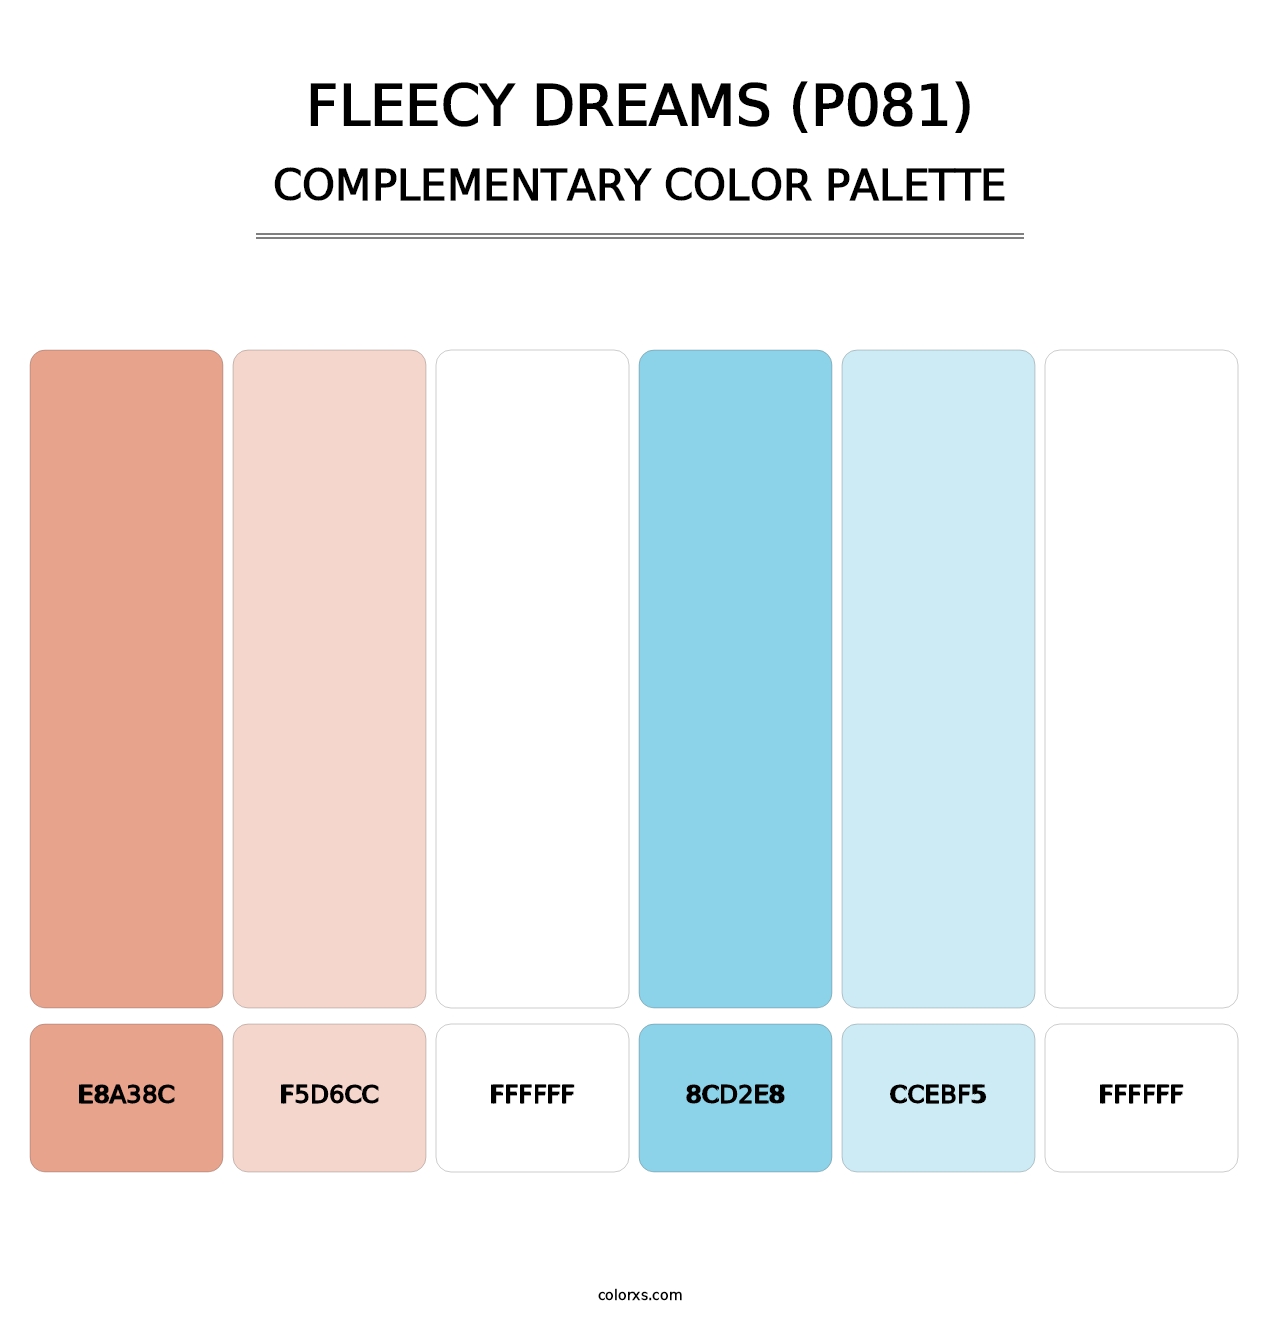 Fleecy Dreams (P081) - Complementary Color Palette